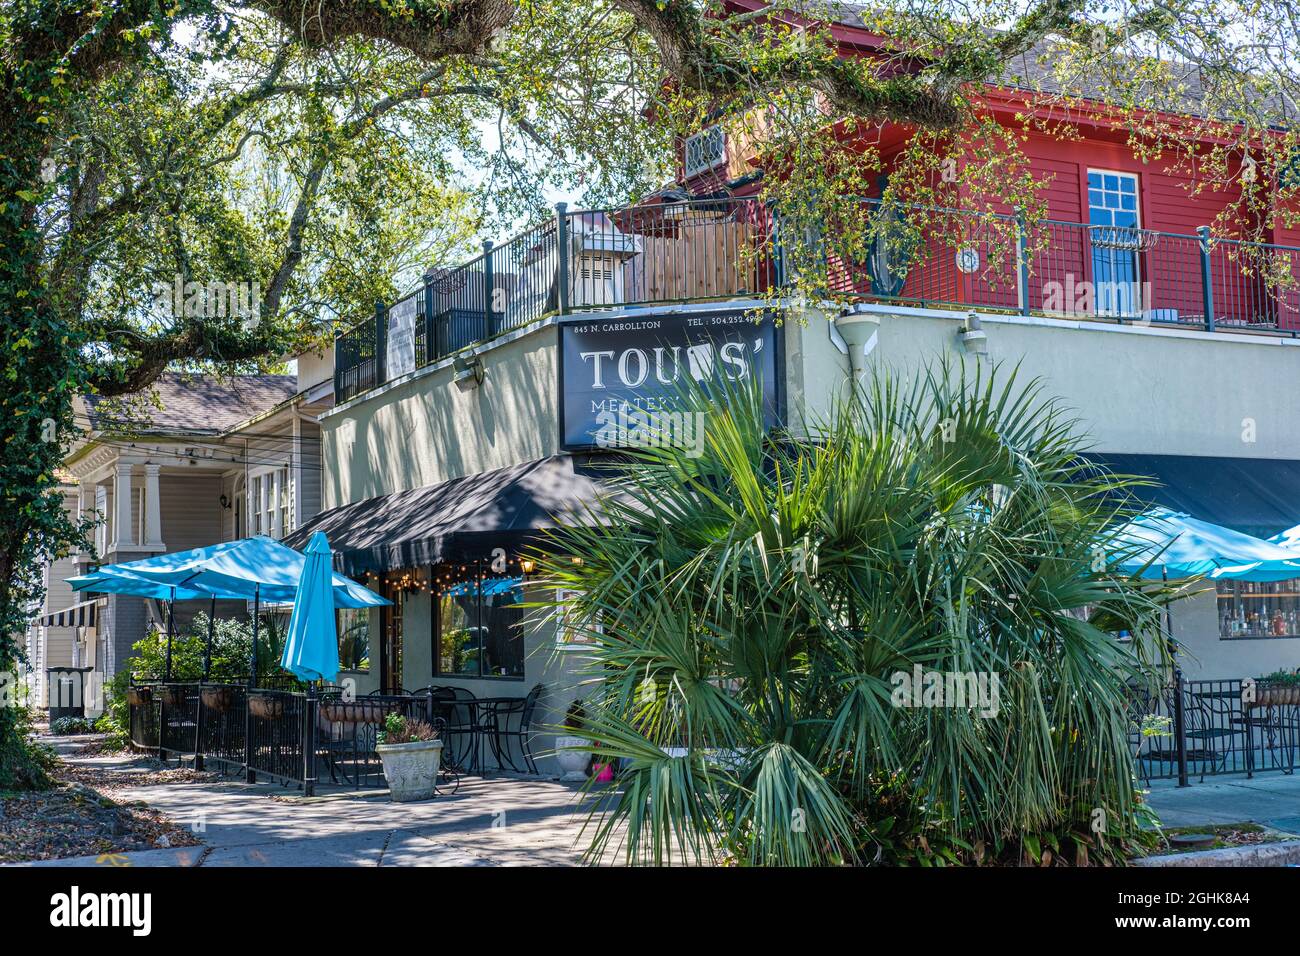 NEW ORLEANS, LA, USA - MARCH 6, 2020: Toups Meatery Restaurant on Carrollton in Mid City Stock Photo